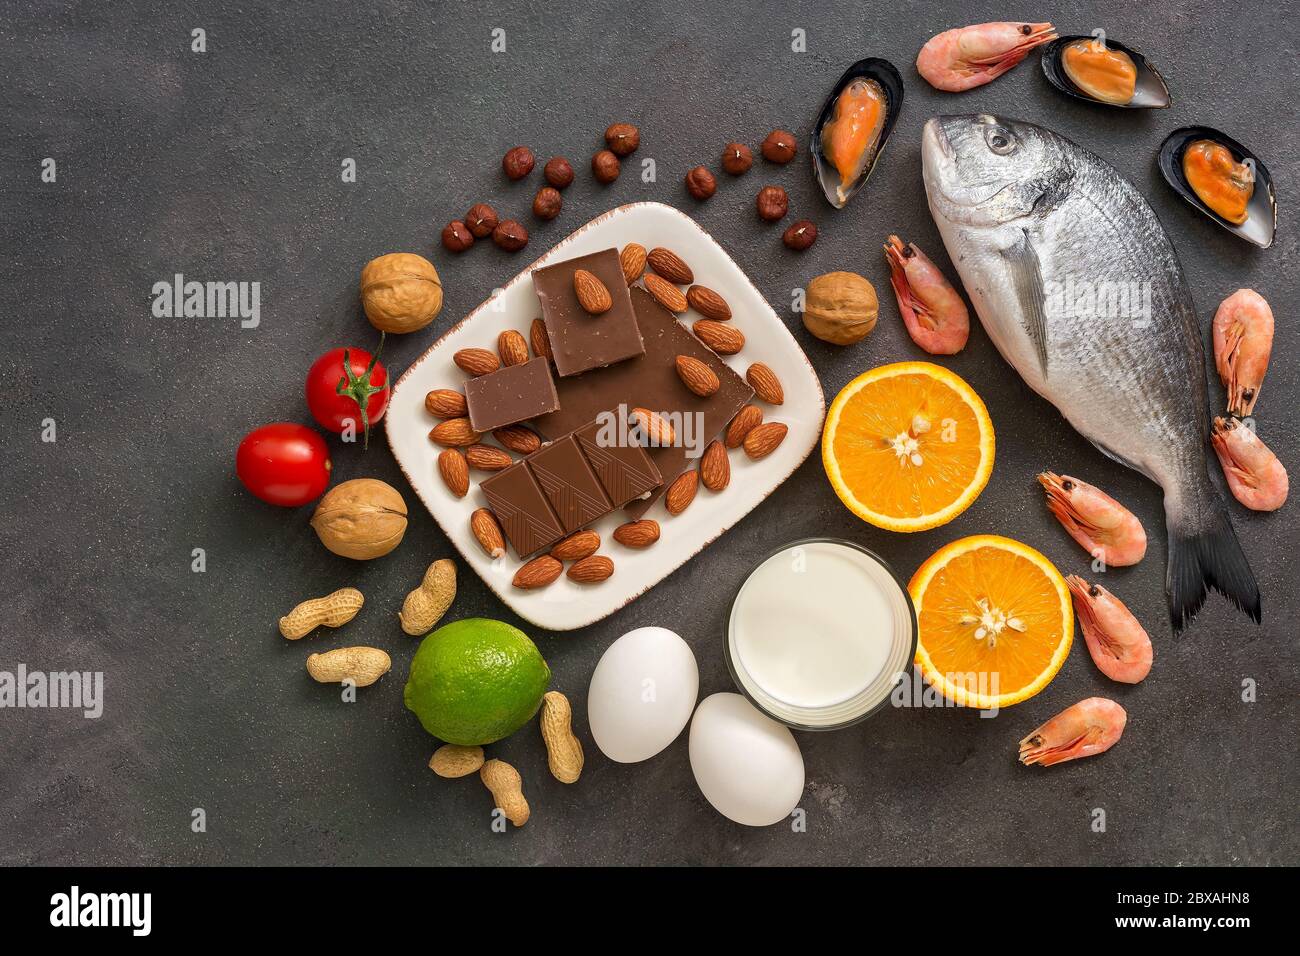 Food allergens. Seafood, milk, chocolate, nuts, citrus fruits, eggs. Allergic food concept. Top view, flat lay, copy space Stock Photo